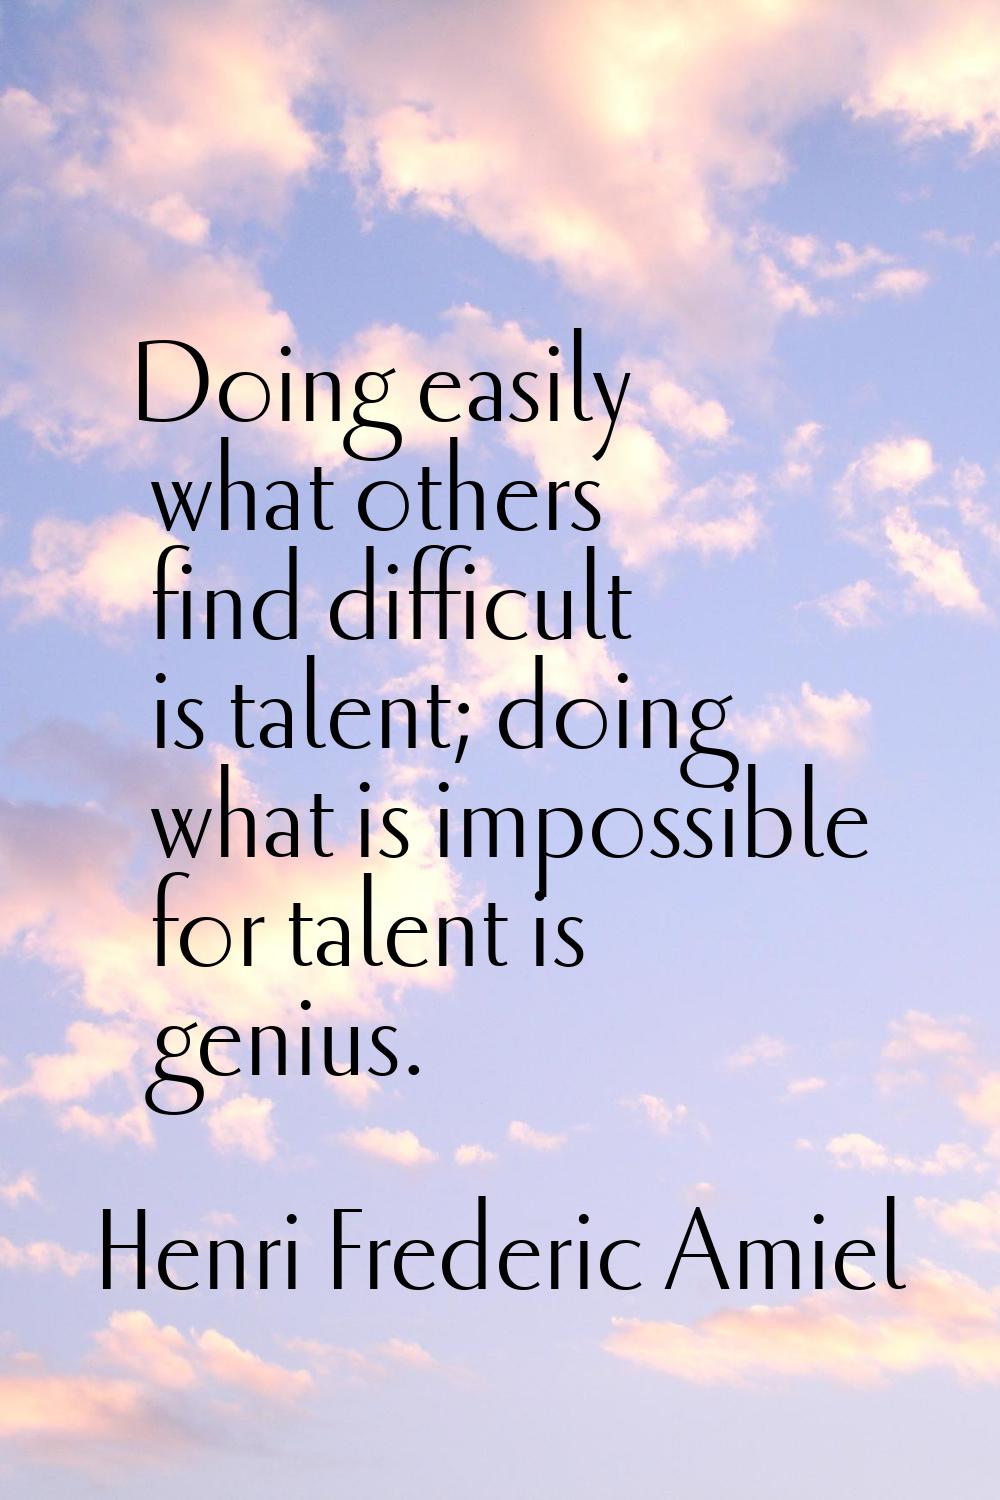 Doing easily what others find difficult is talent; doing what is impossible for talent is genius.